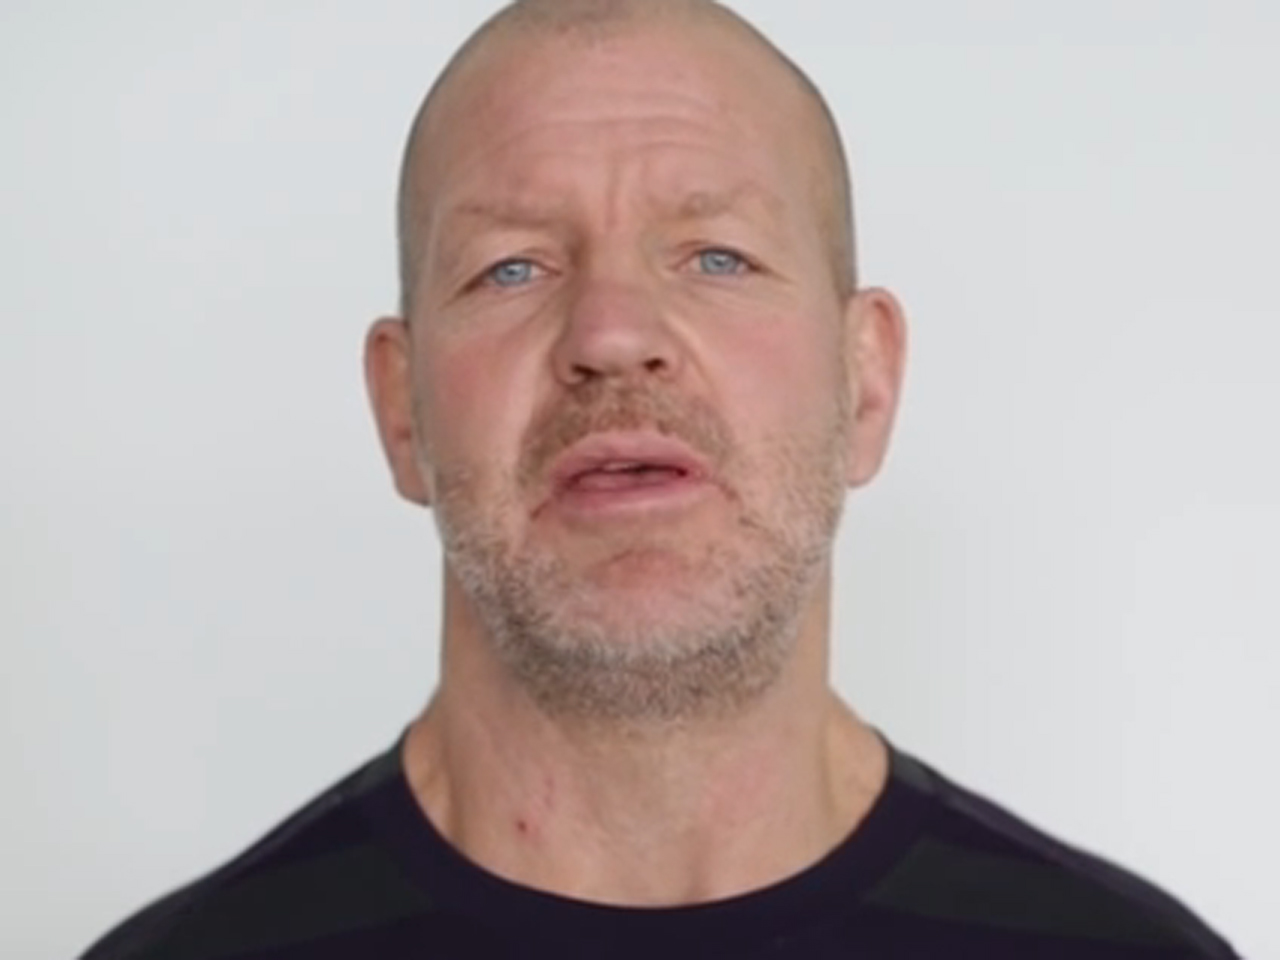 Lululemon founder Chip Wilson issues apology following thigh-rubbing ...